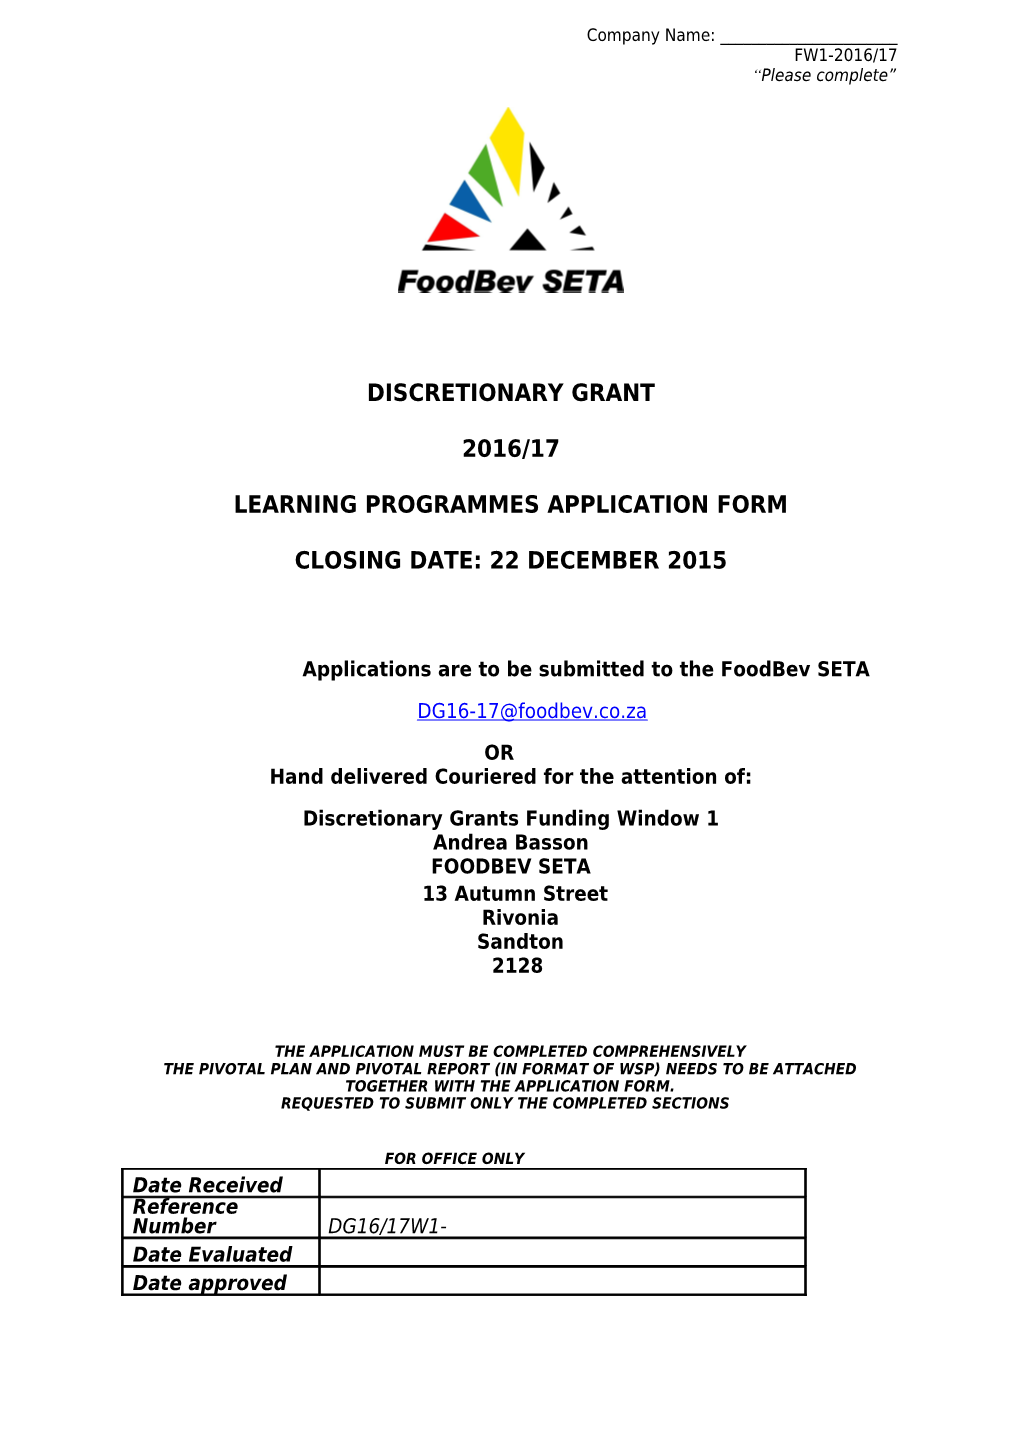 Applications Are to Be Submitted to the Foodbev SETA s1